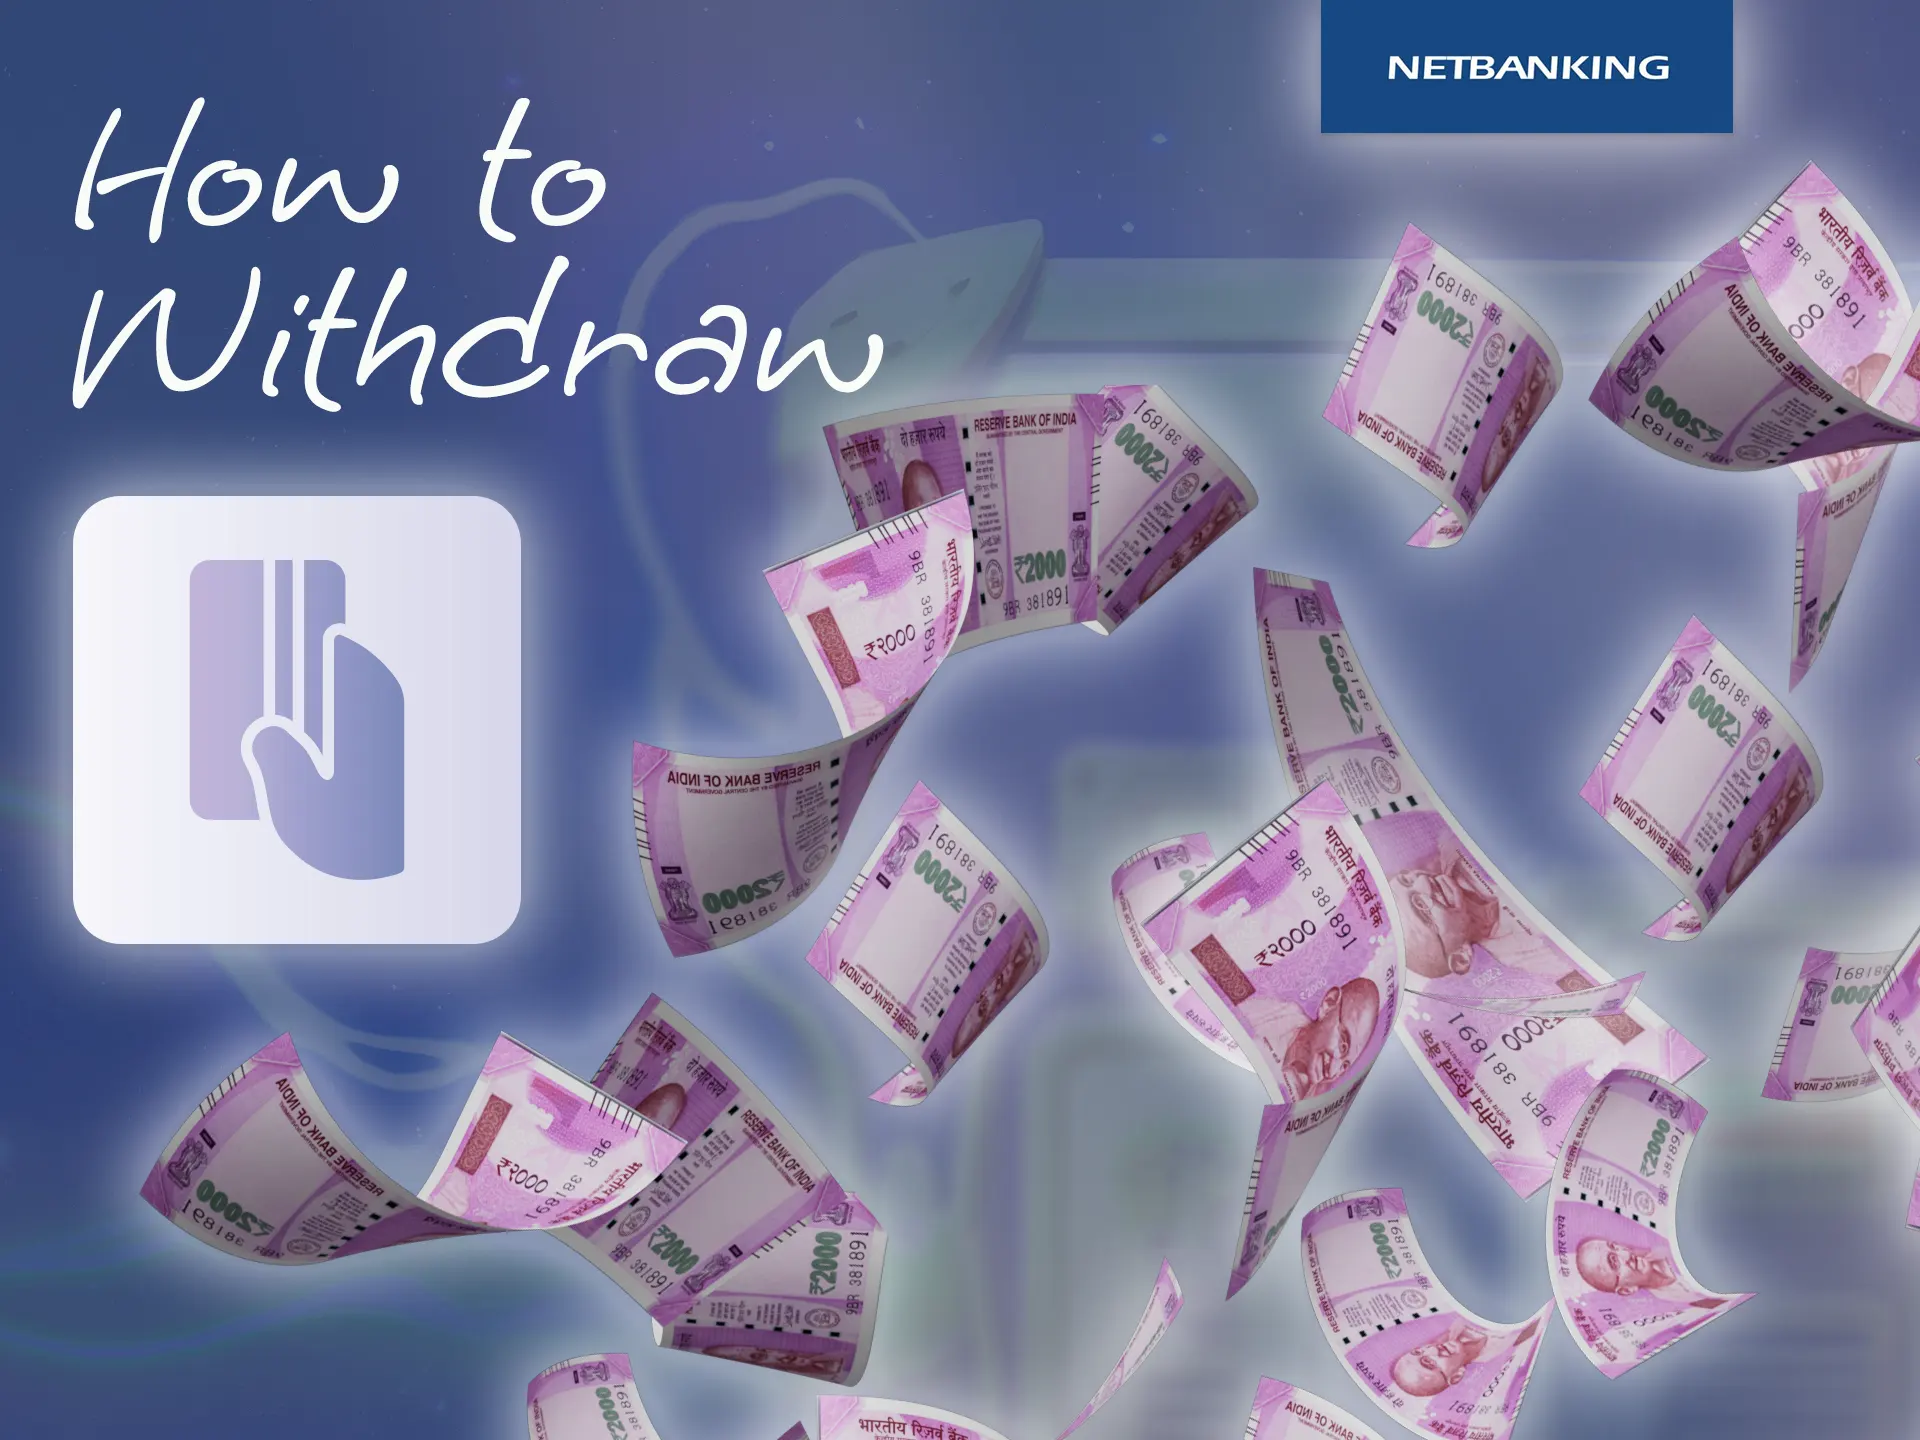 Withdraw money from your gaming account using Netbanking.